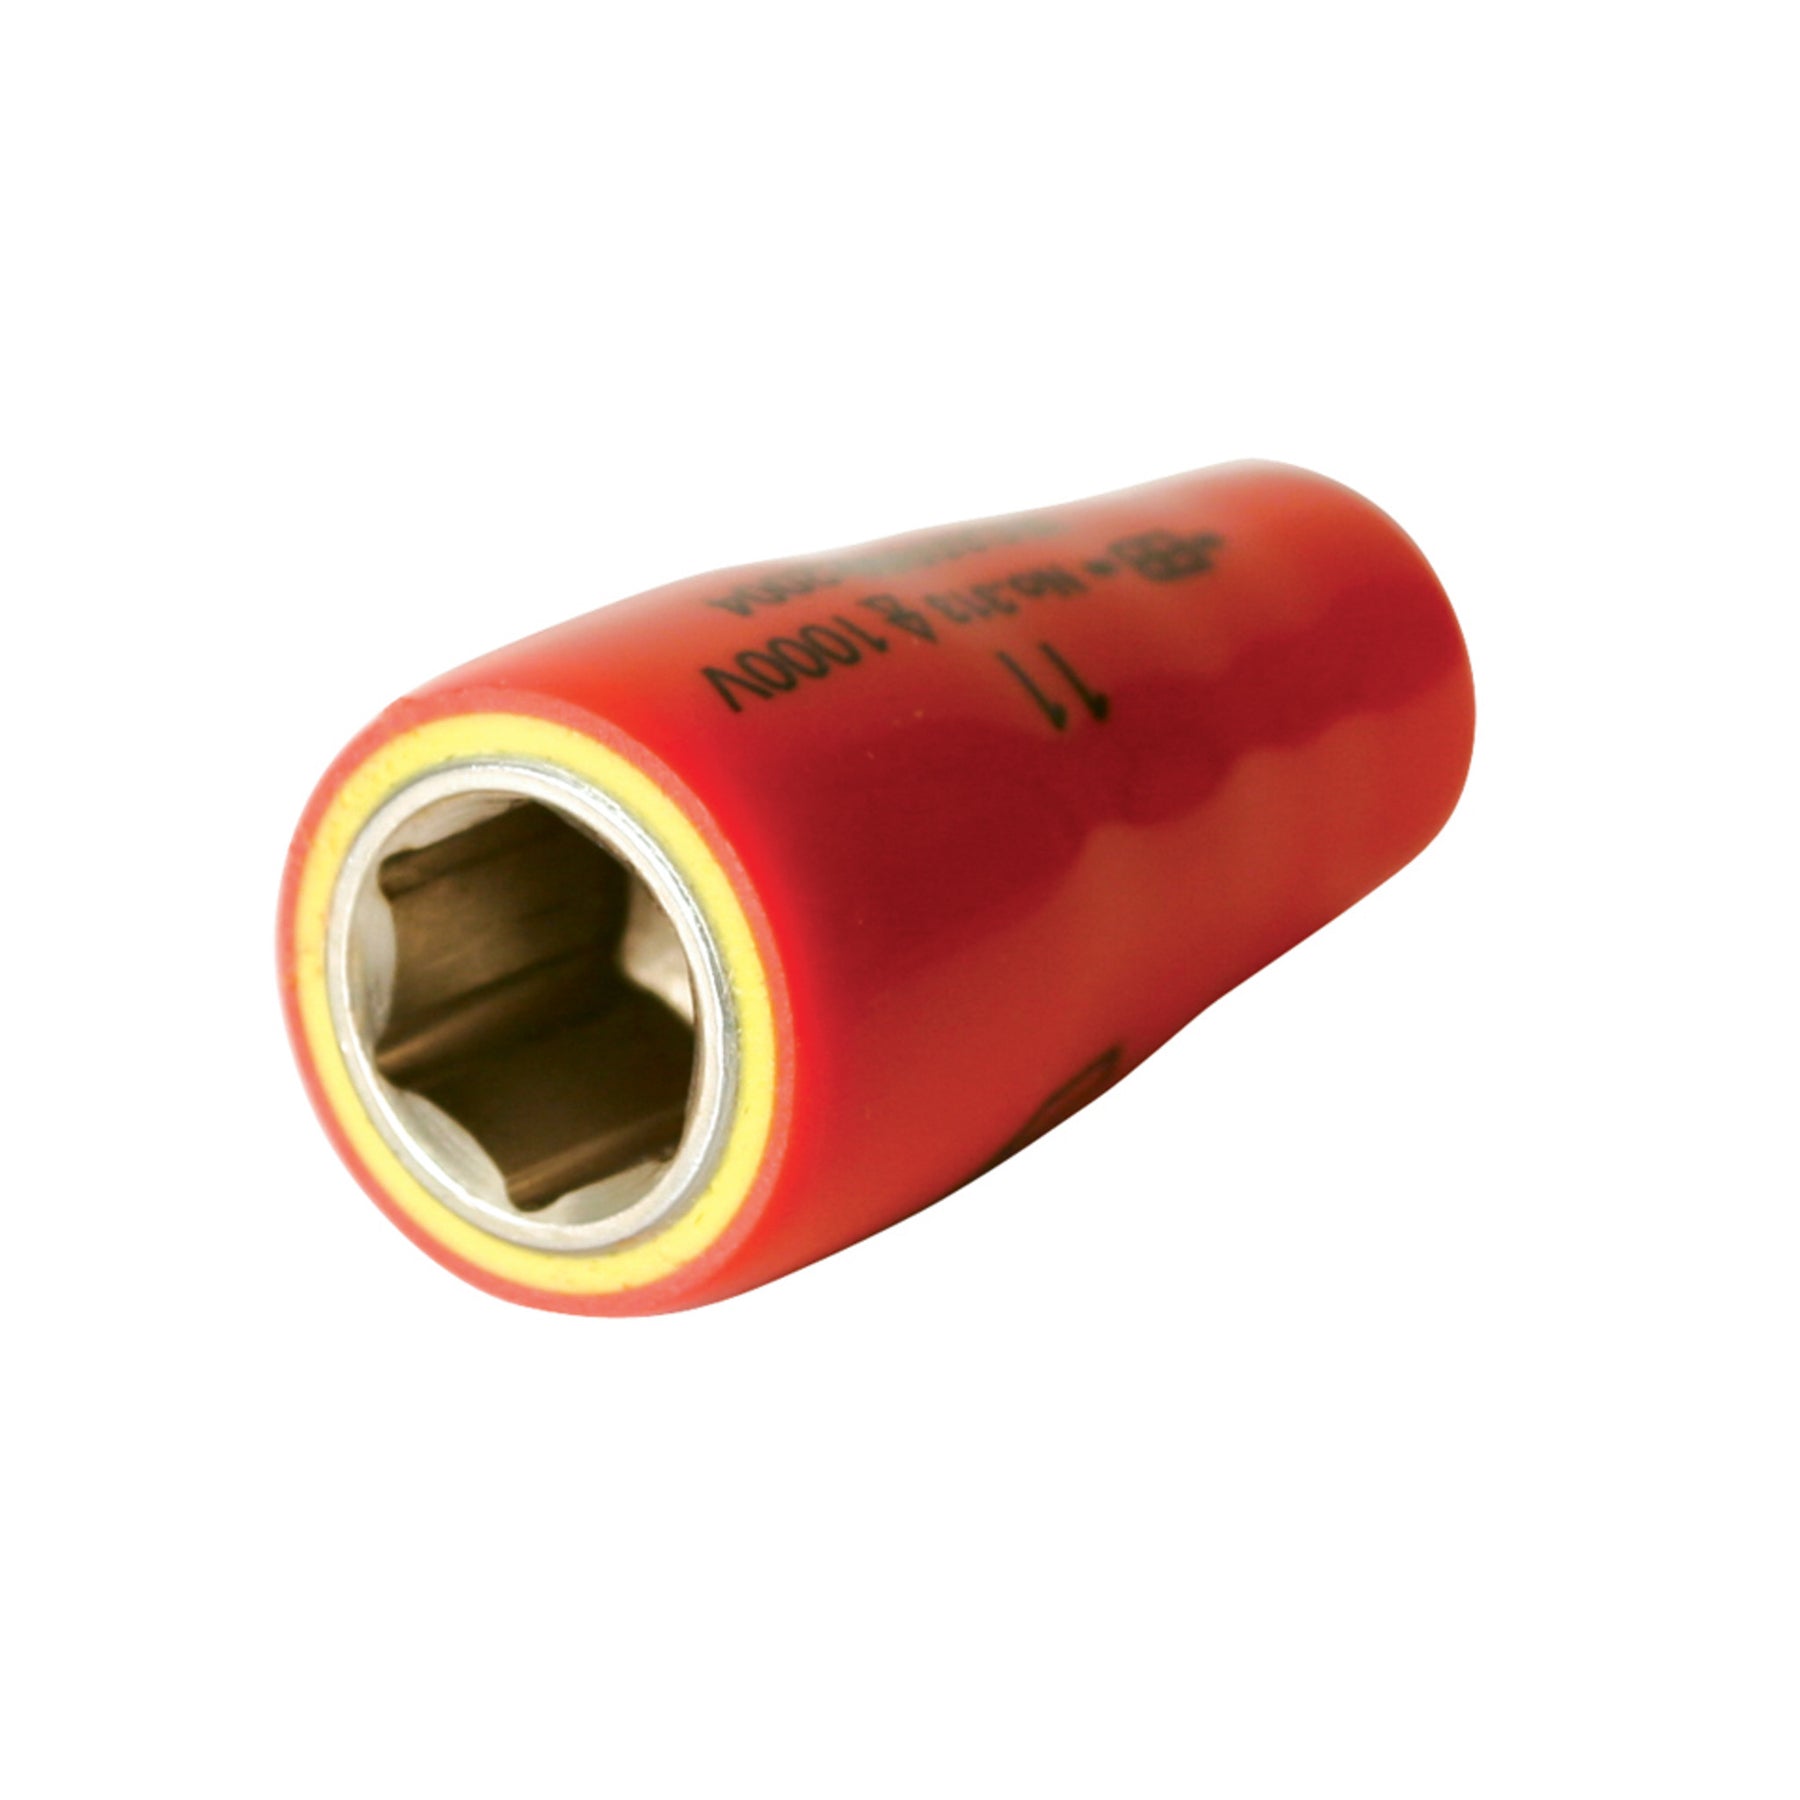 Insulated Socket 1/4" Drive 14mm